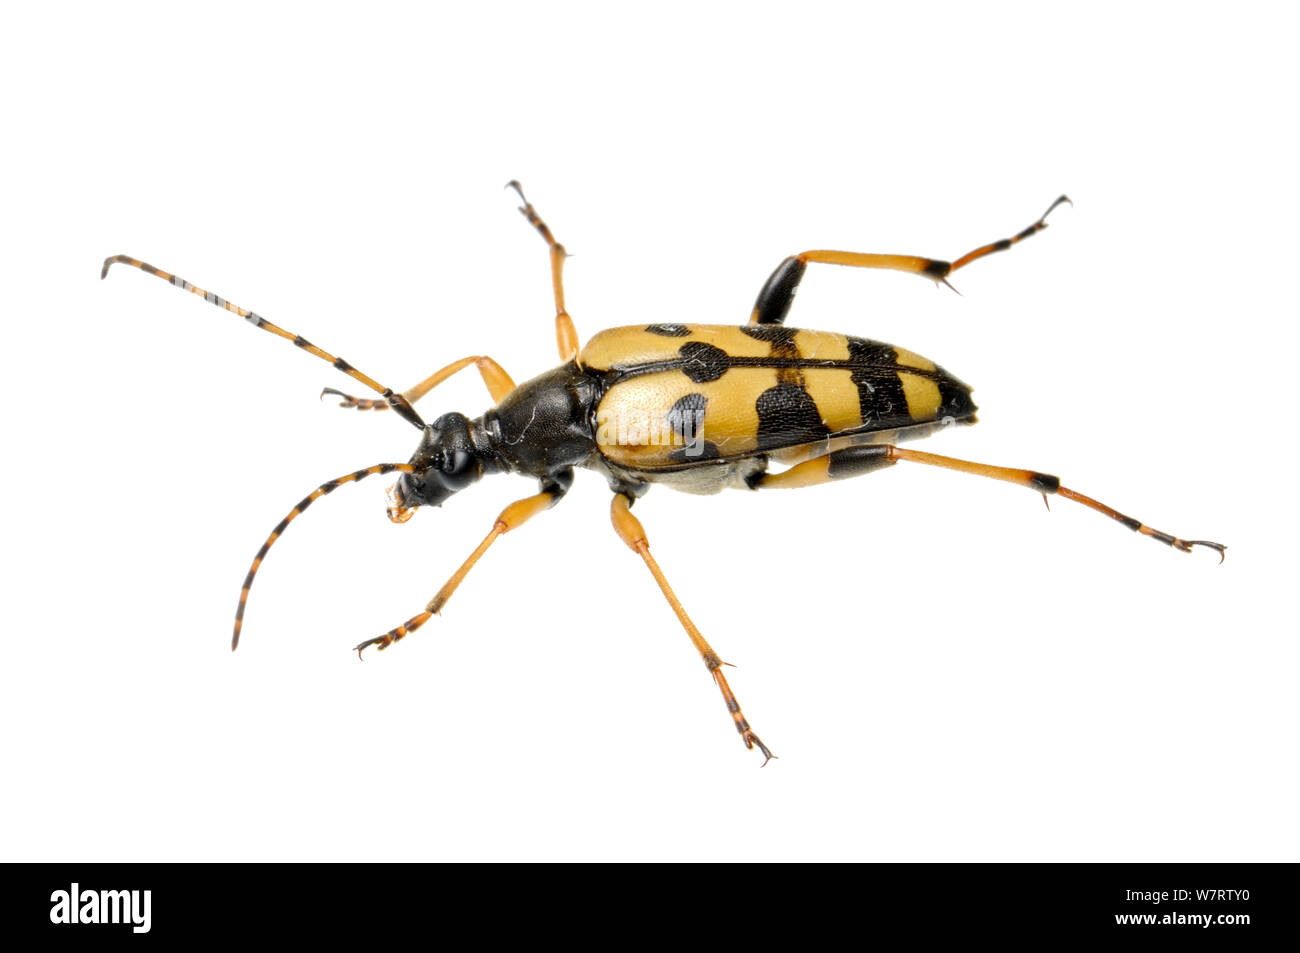 Spotted Longhorn Beetle (Rutpela maculata), Slovenia, Europe, July, meetyourneighbours.net project Stock Photo